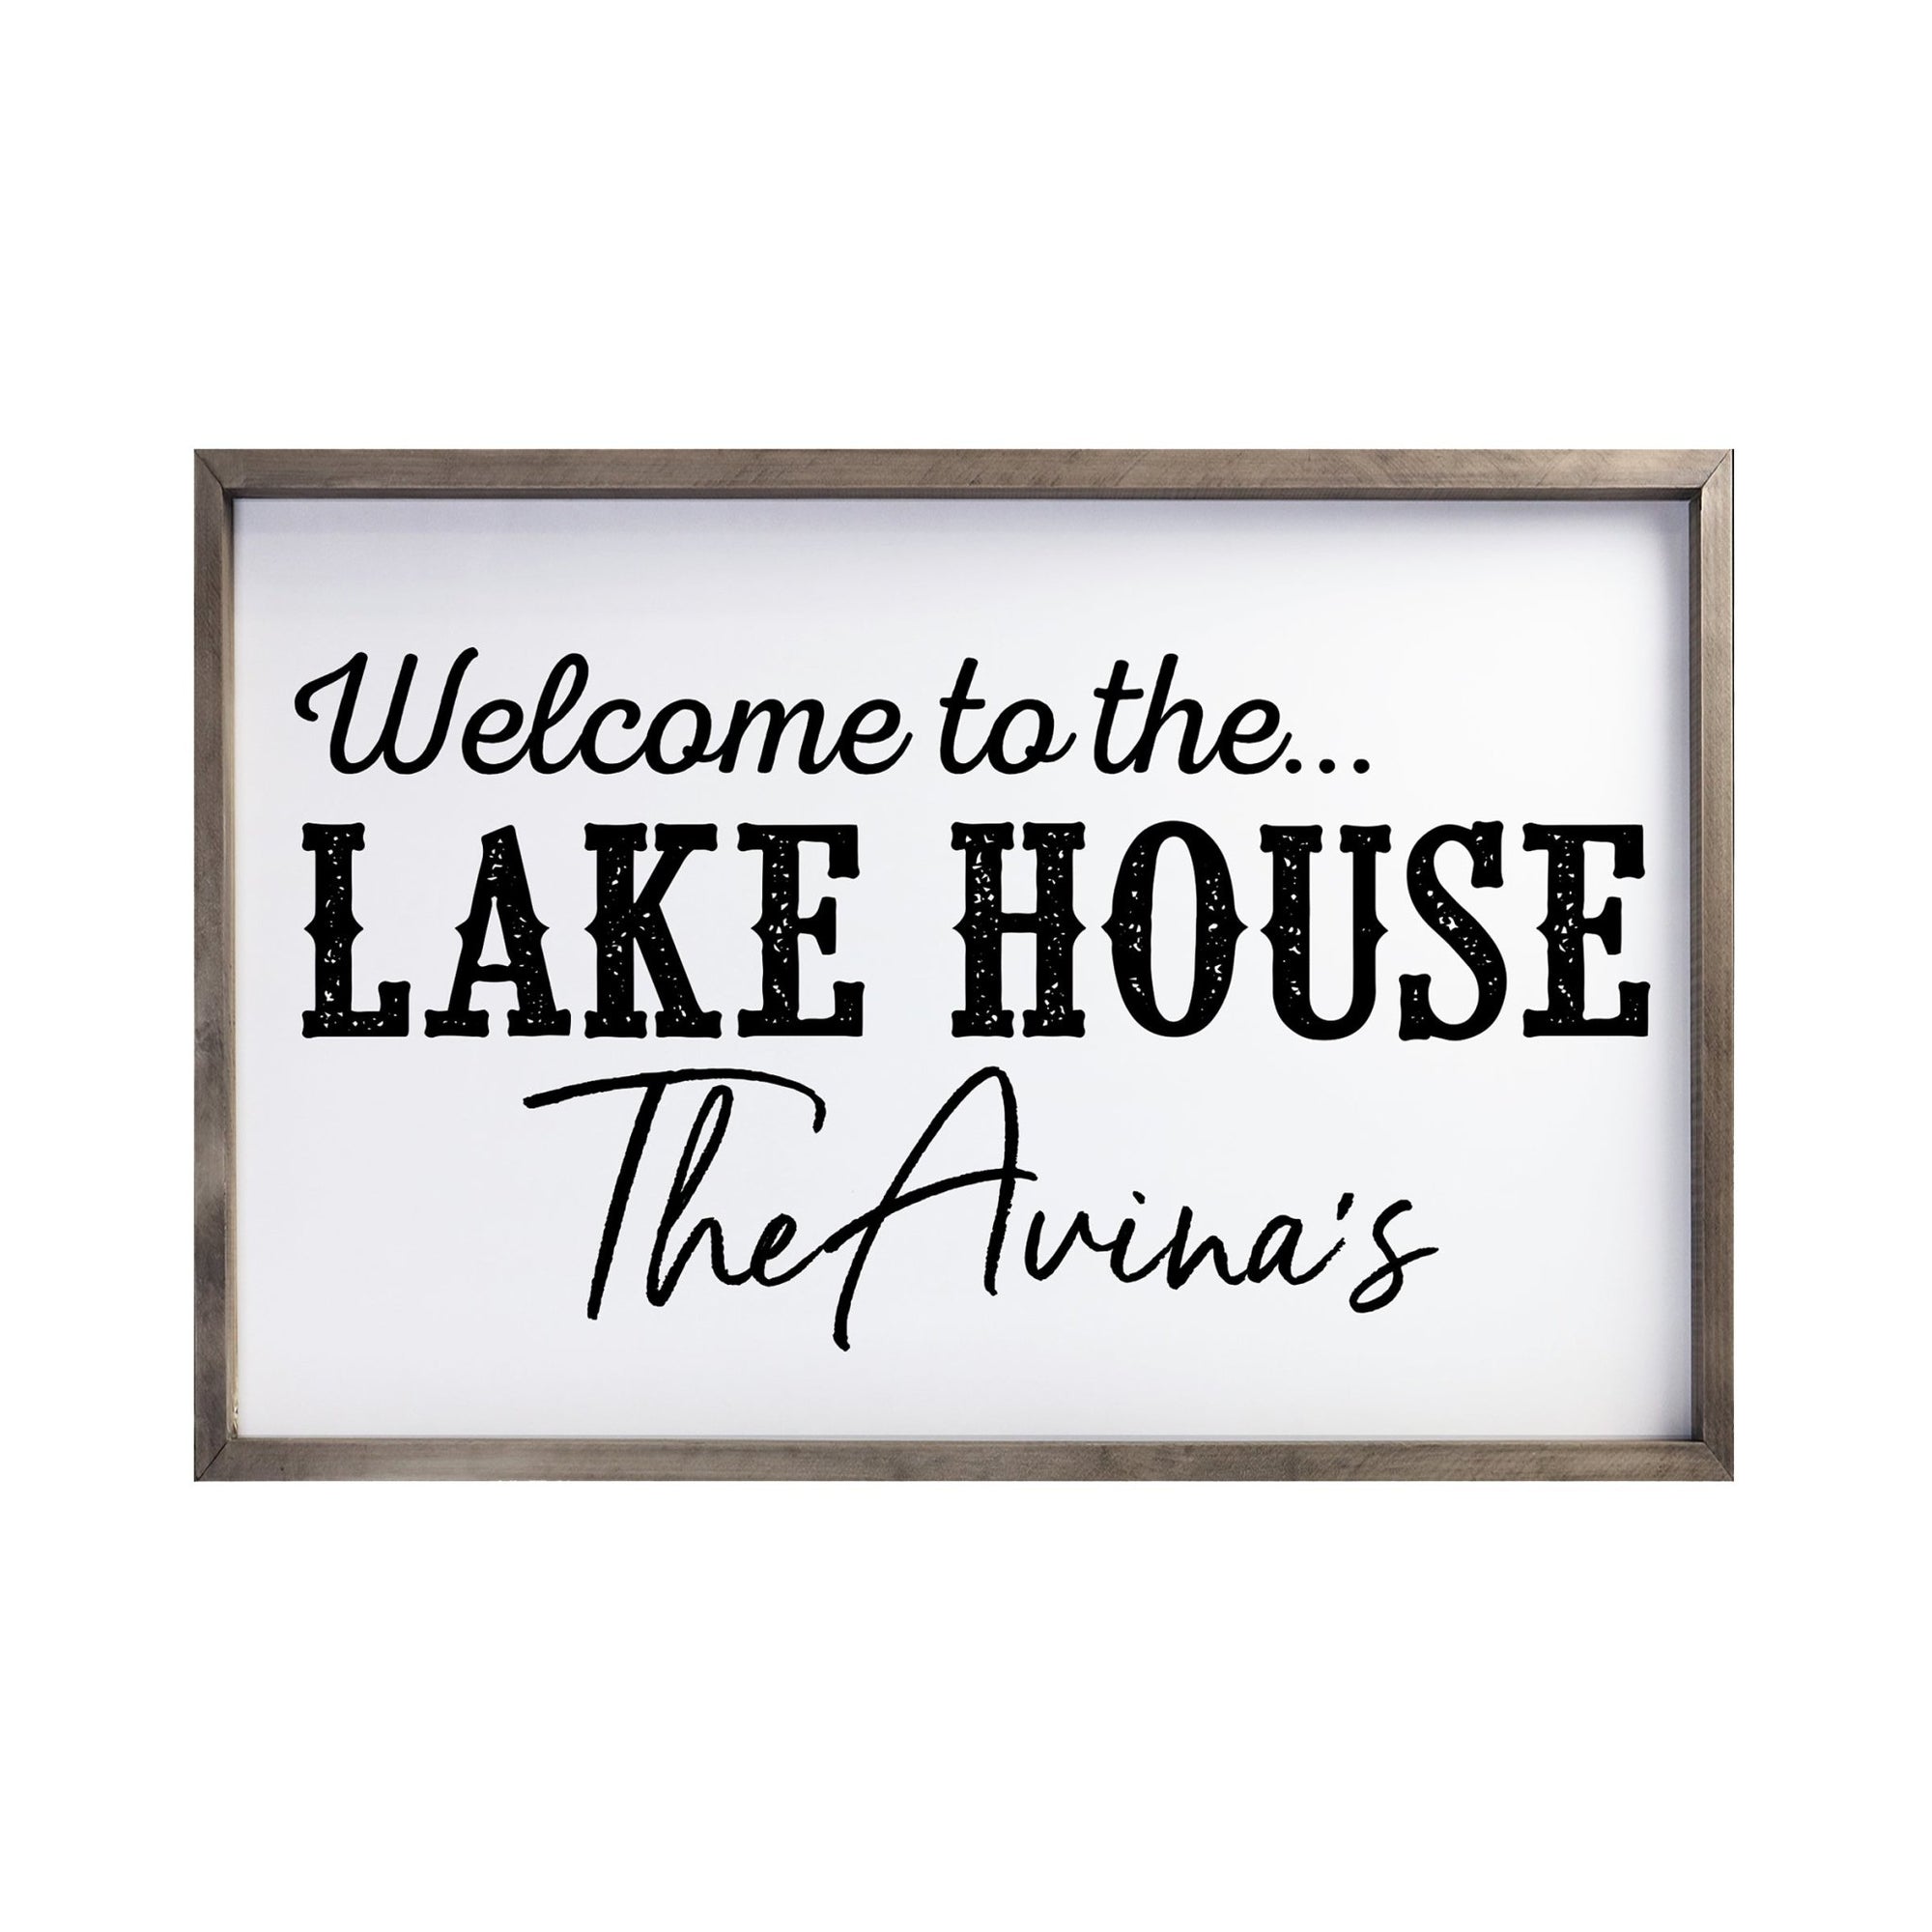 Inspirational Personalized Framed Shadow Box 25x36 - Welcome to the Lake House - LifeSong Milestones